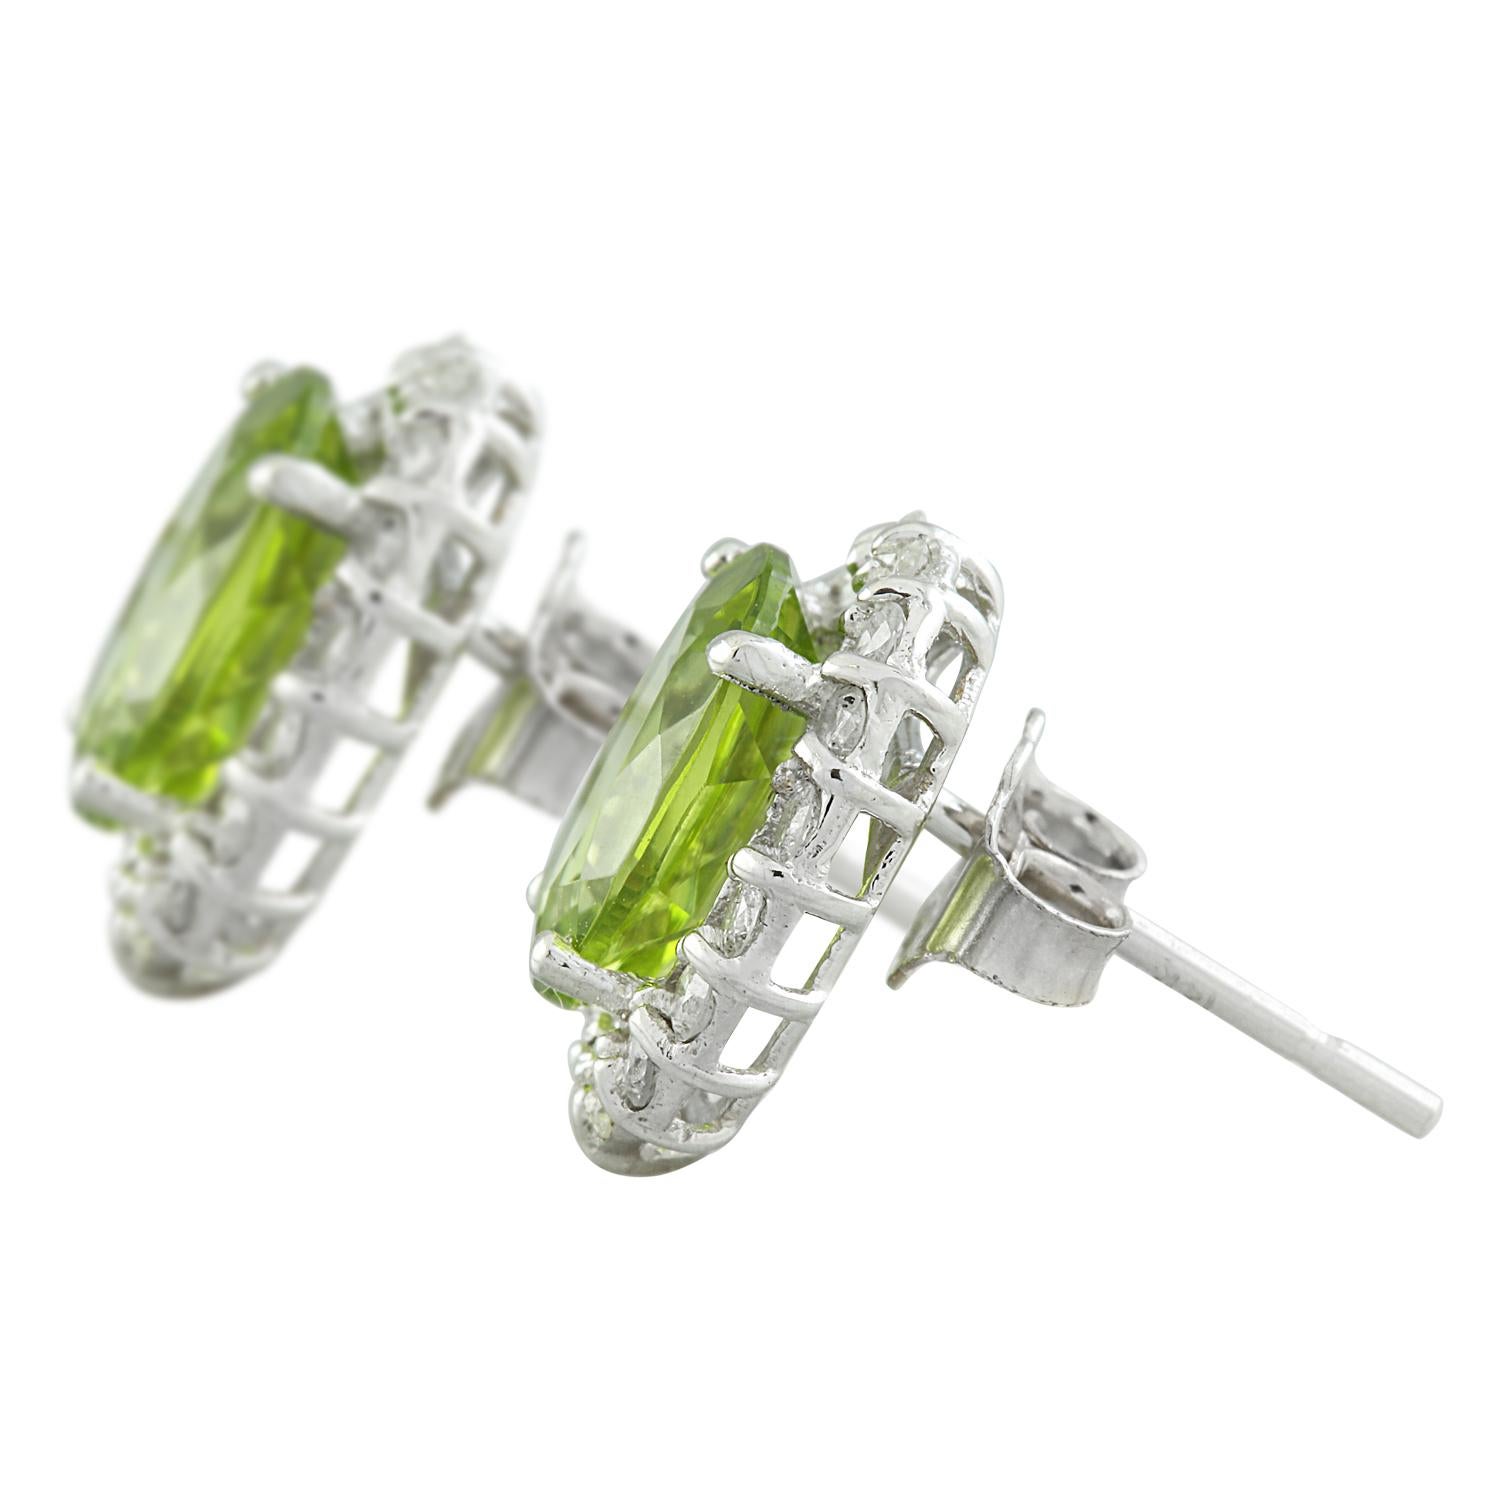 Peridot Diamond Earrings In 14 Karat White Gold In New Condition For Sale In Los Angeles, CA